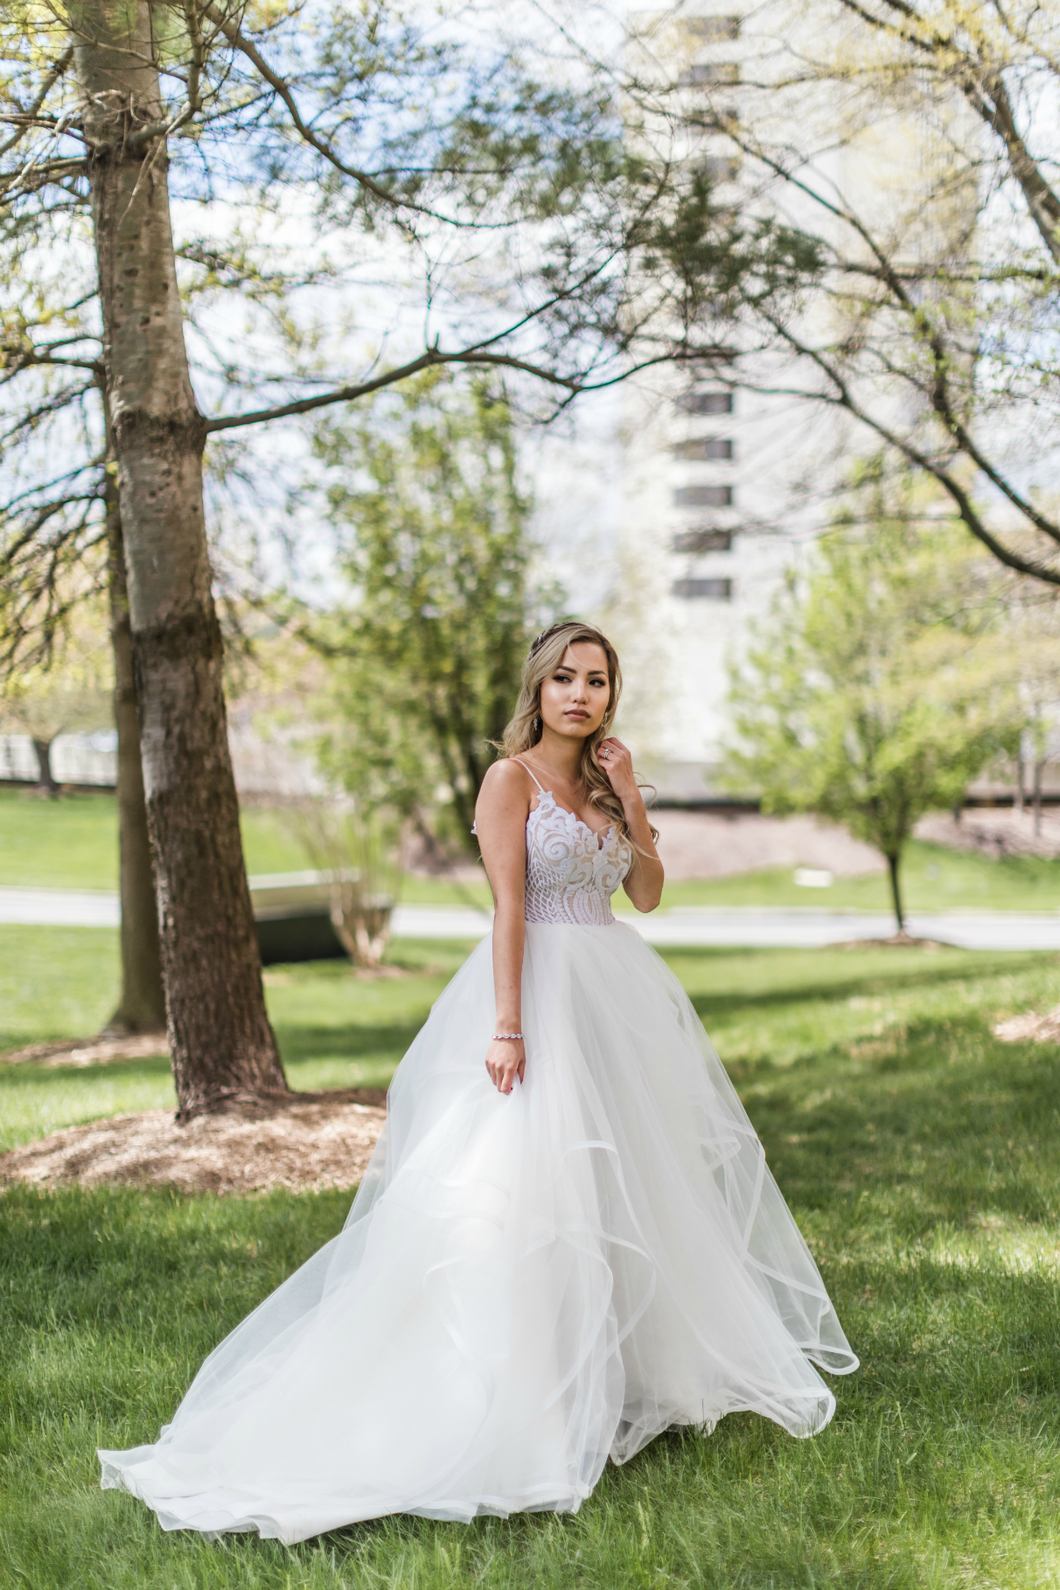 hayley paige pepper wedding gown